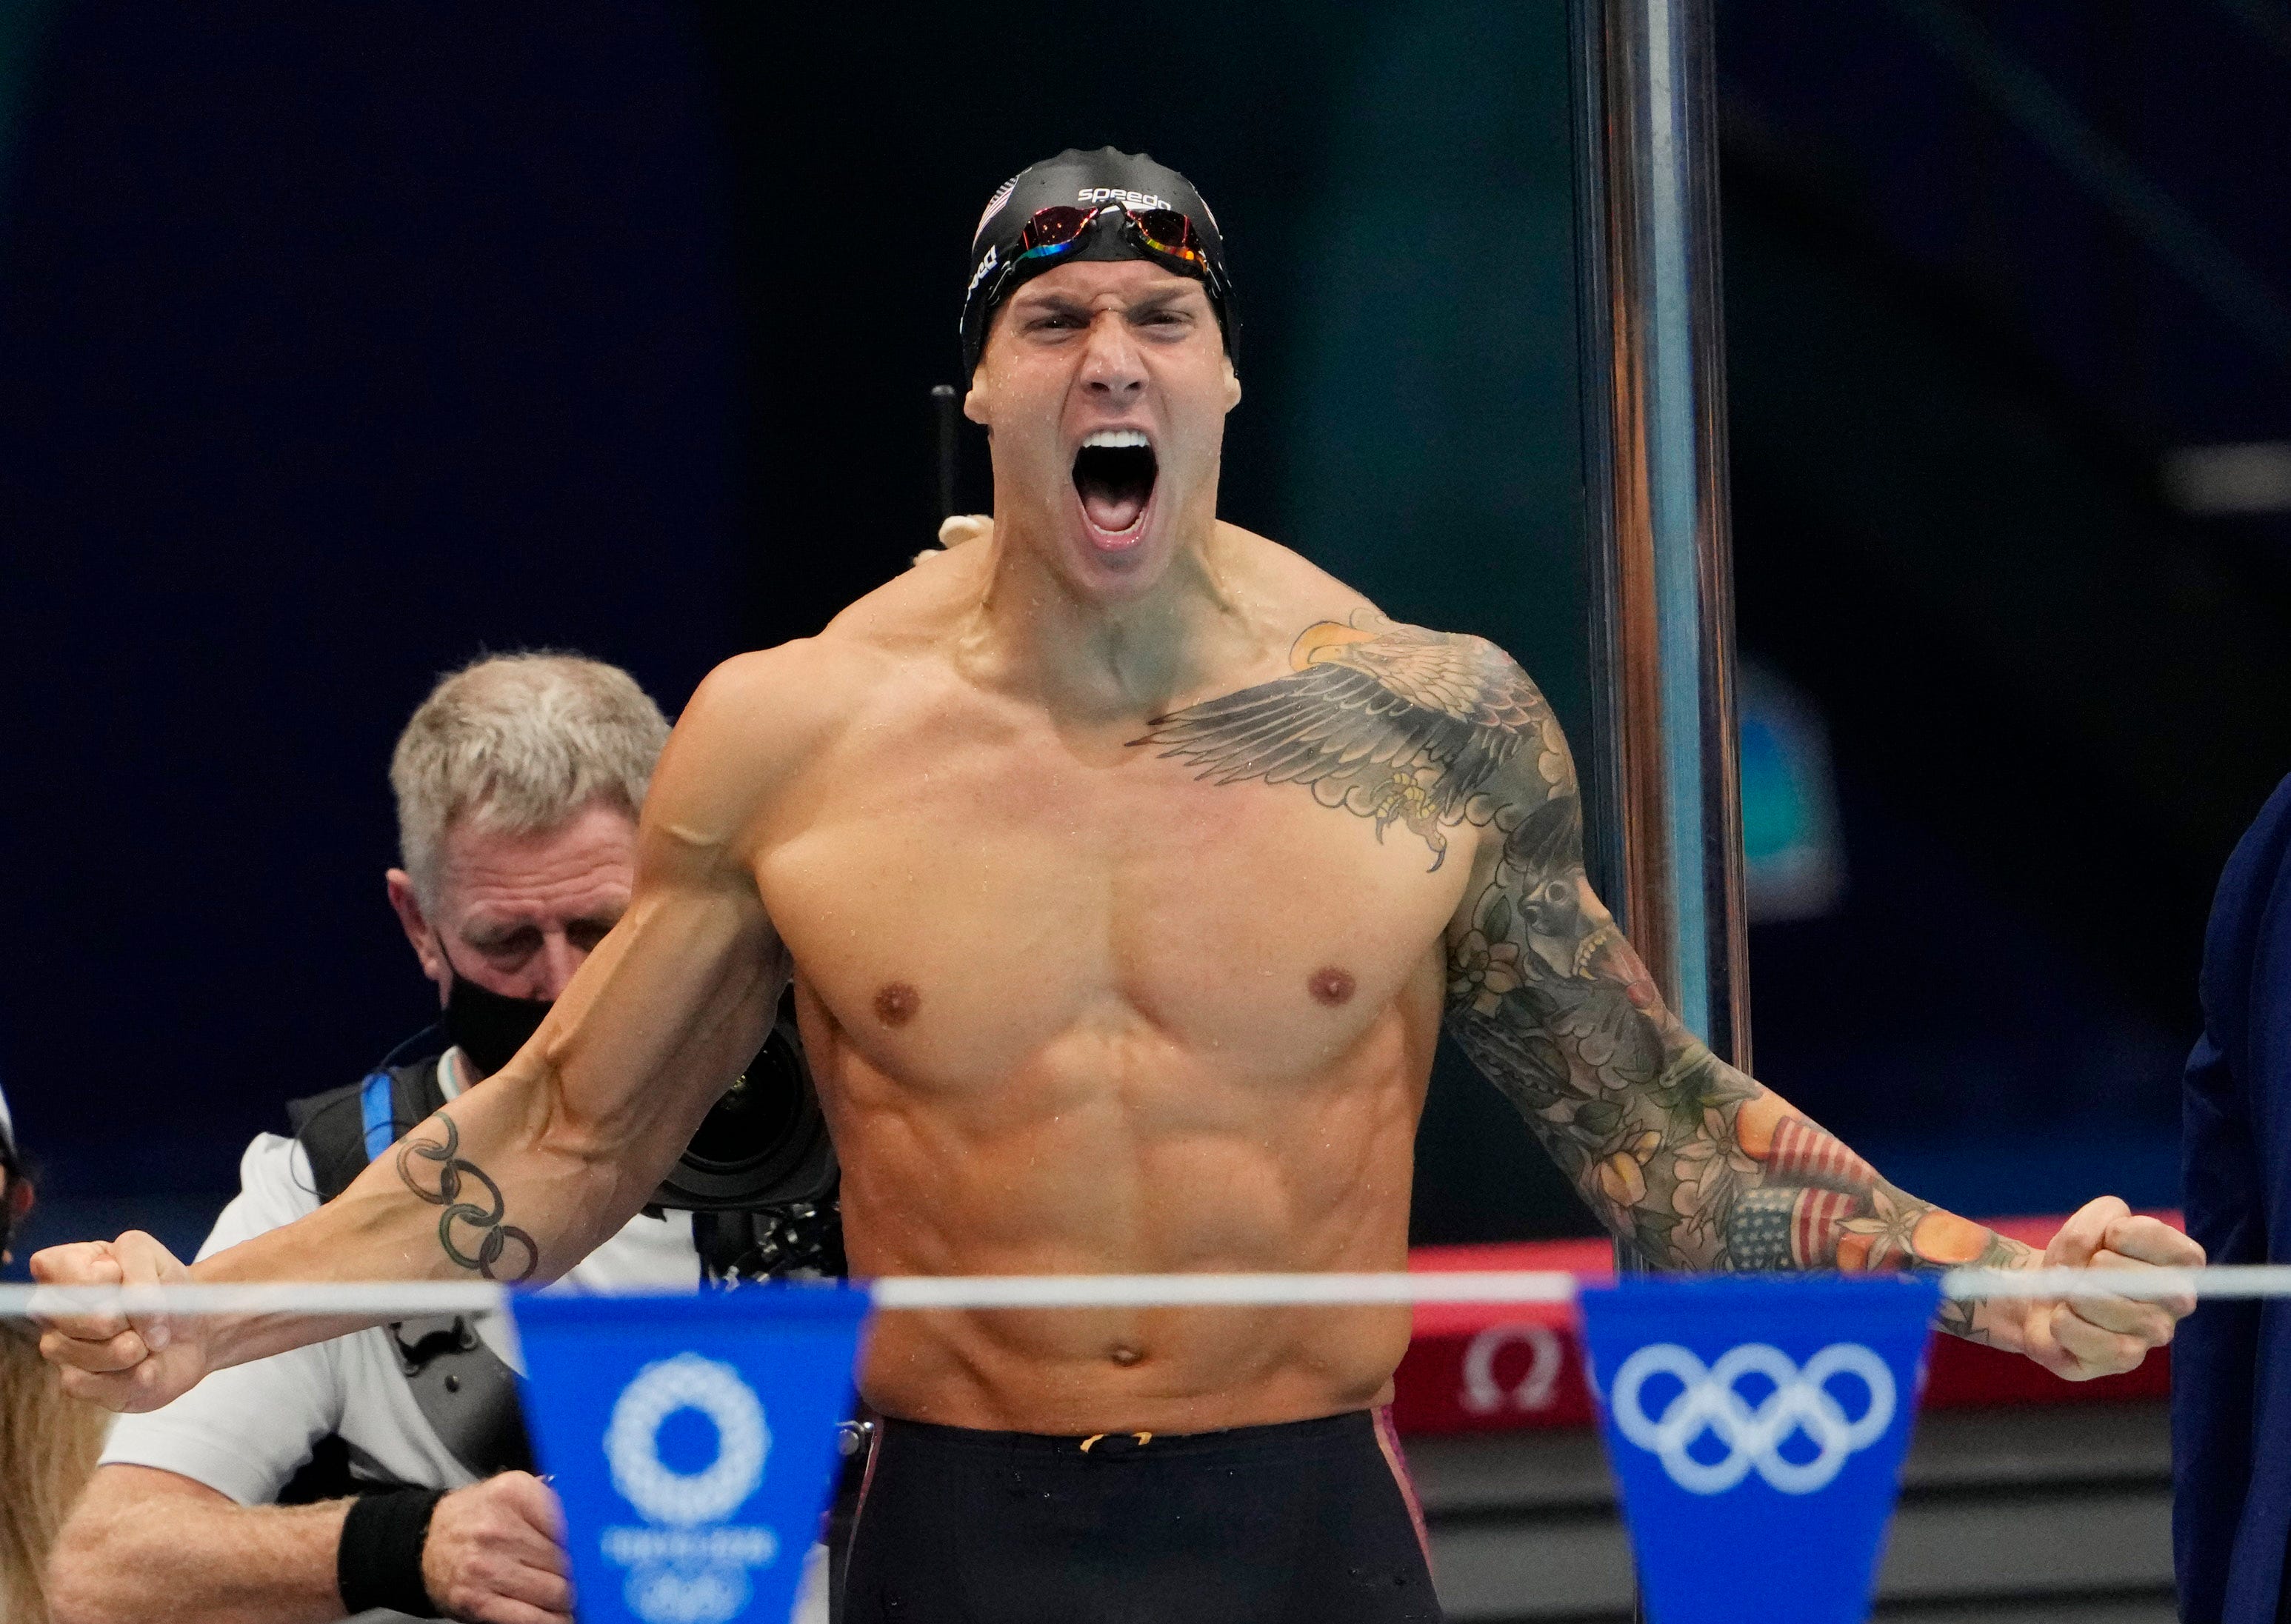 August 1, 2021: Caeleb Dressel (USA) celebrates after winning the men's 4x100m medley final during the Tokyo 2020 Olympic Summer Games at Tokyo Aquatics Centre.